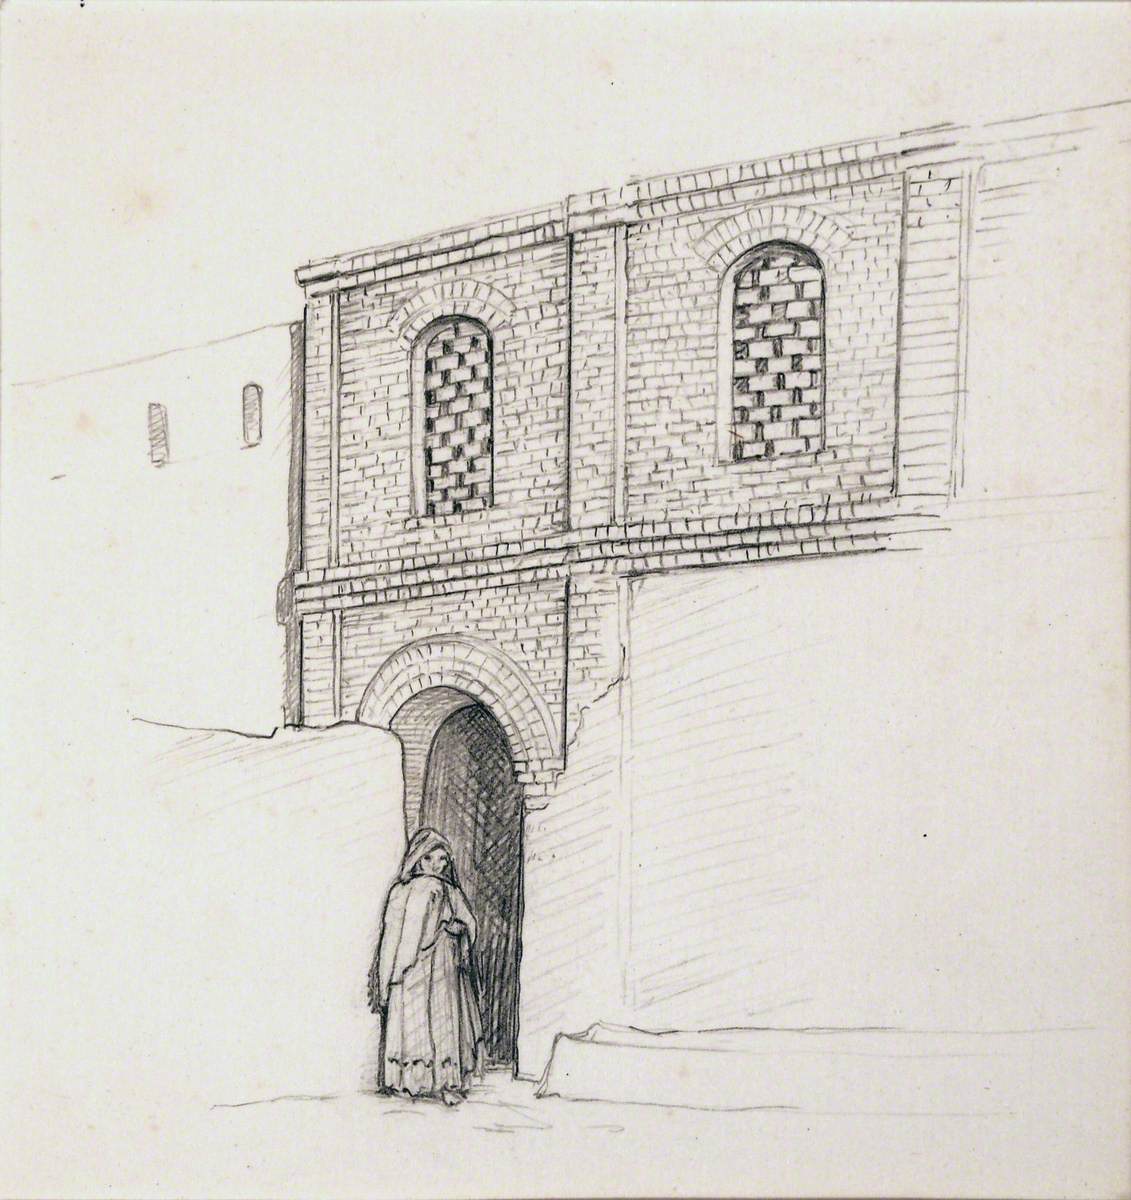 Drawing of an Arab Child in a Doorway of a Brick Building